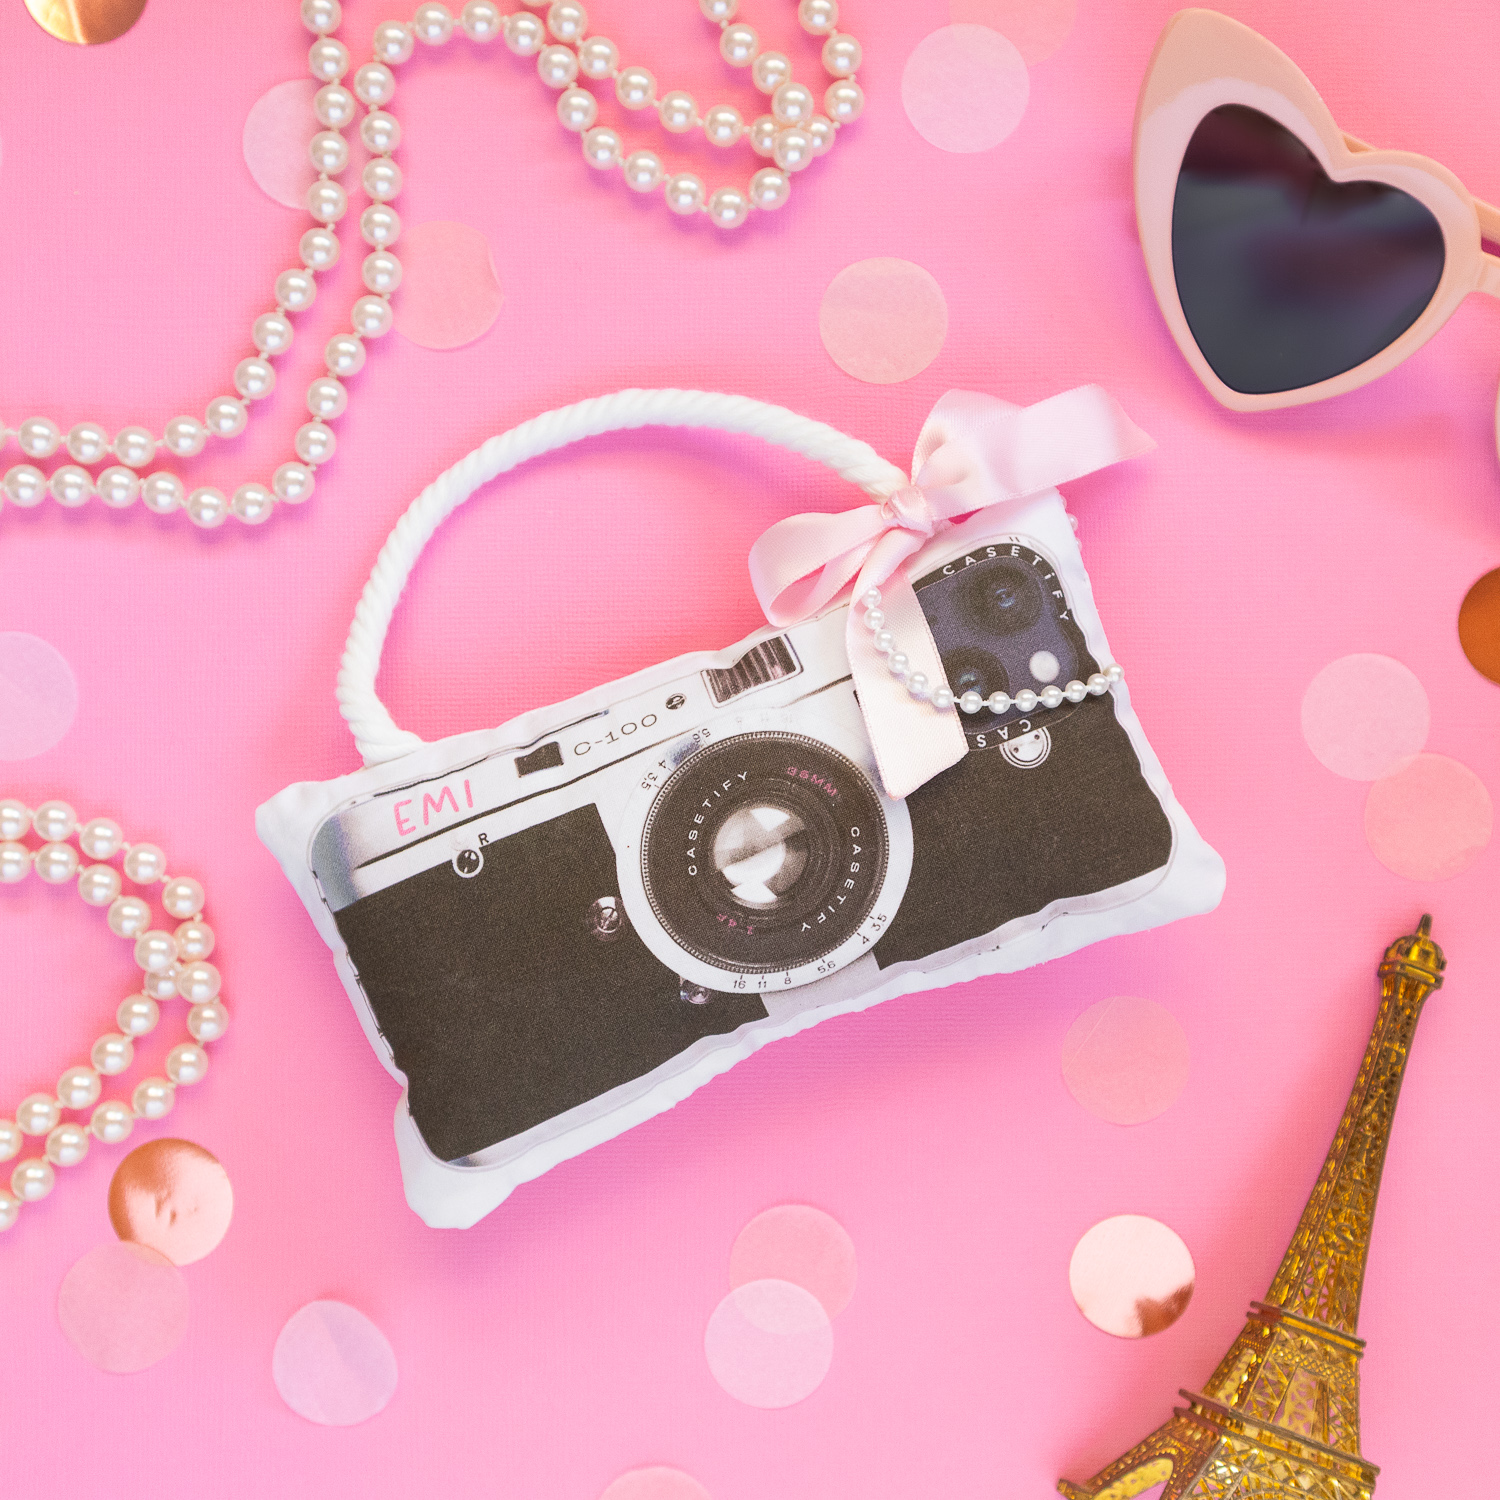 DIY Emily in Paris-inspired dog toy made to look like a real vintage camera. The toy is placed on a pink backdrop and is styled with pearls, pink heart sunglasses, an Eiffel tower figuring and light pink confetti.